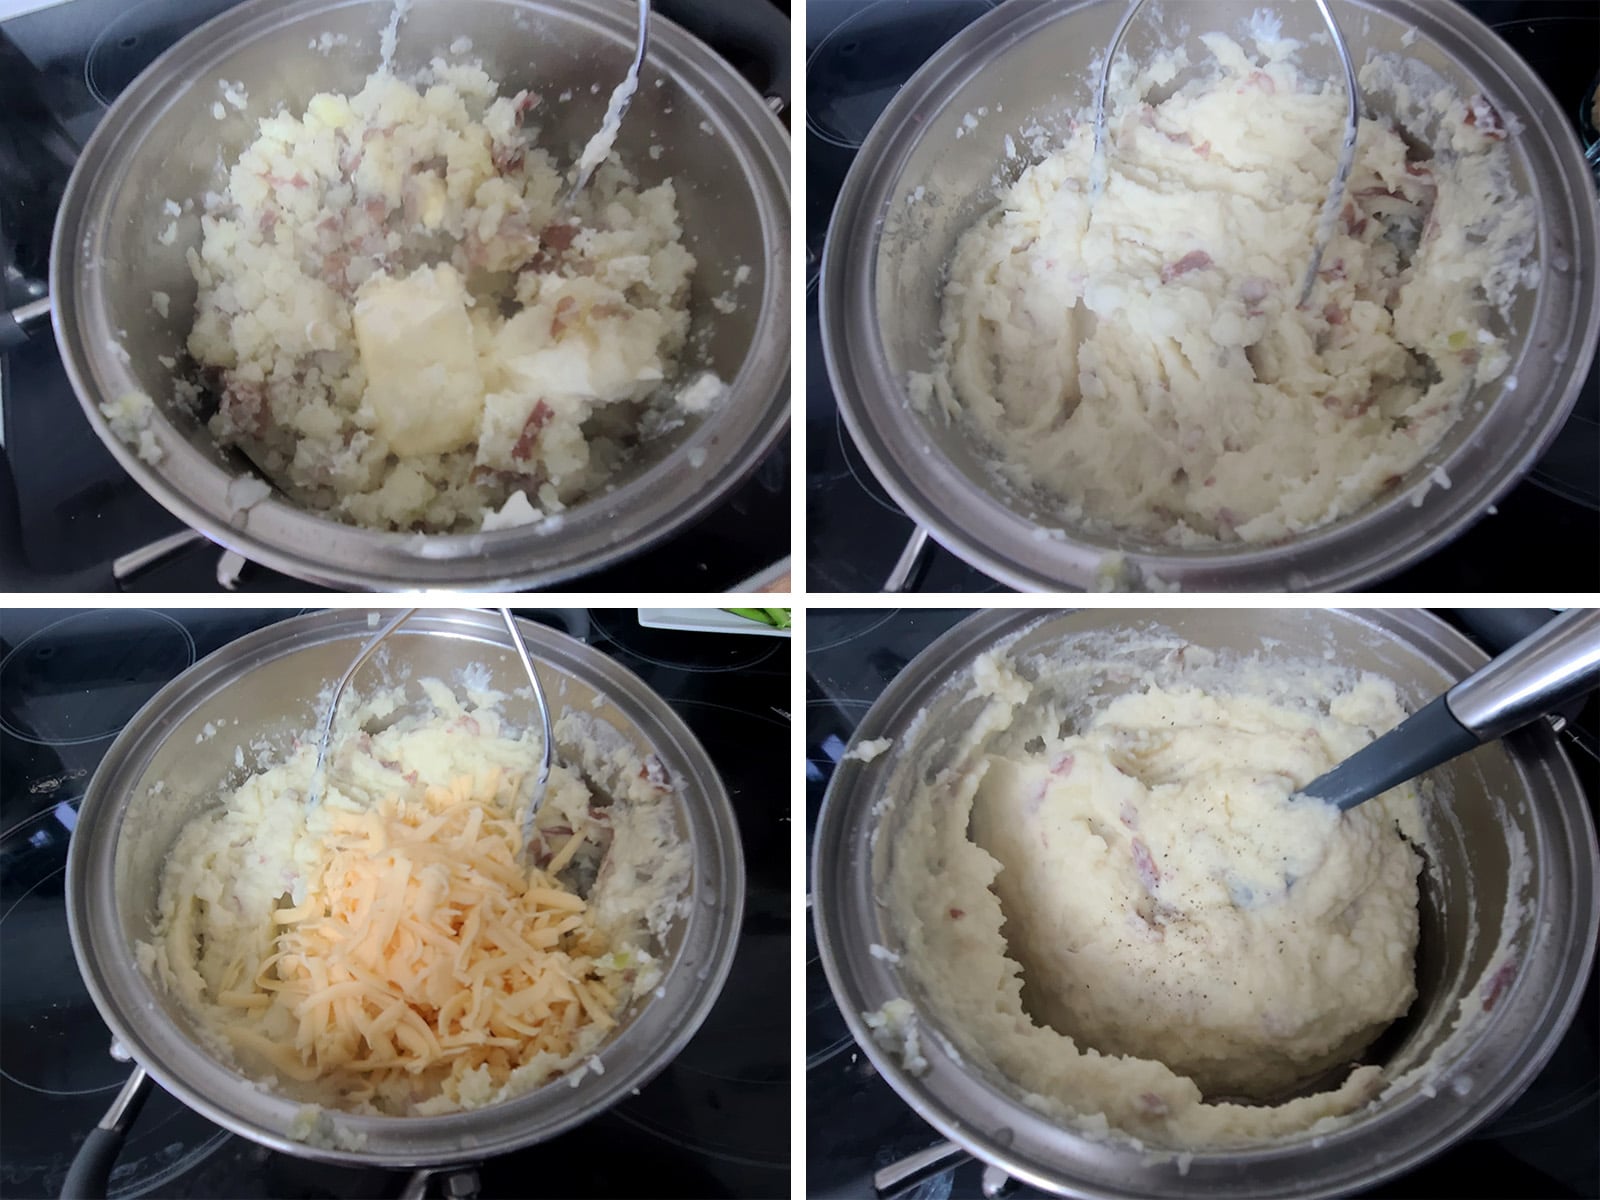 A 4 part image showing the remaining ingredients being added and mashed in.